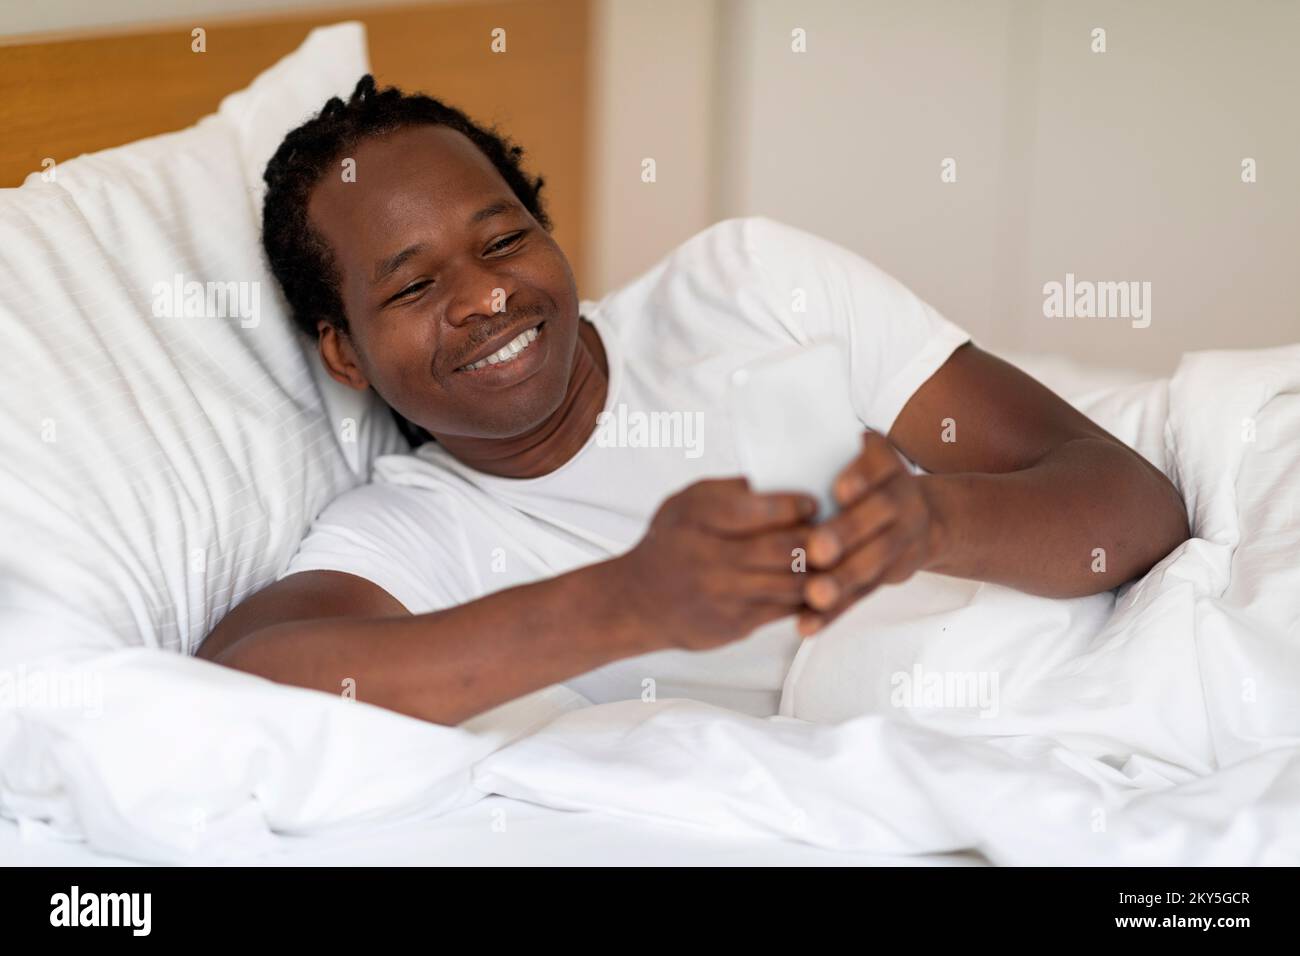 Smiling Black Man Playing Online Games On Smartphone While Lying In Bed Stock Photo